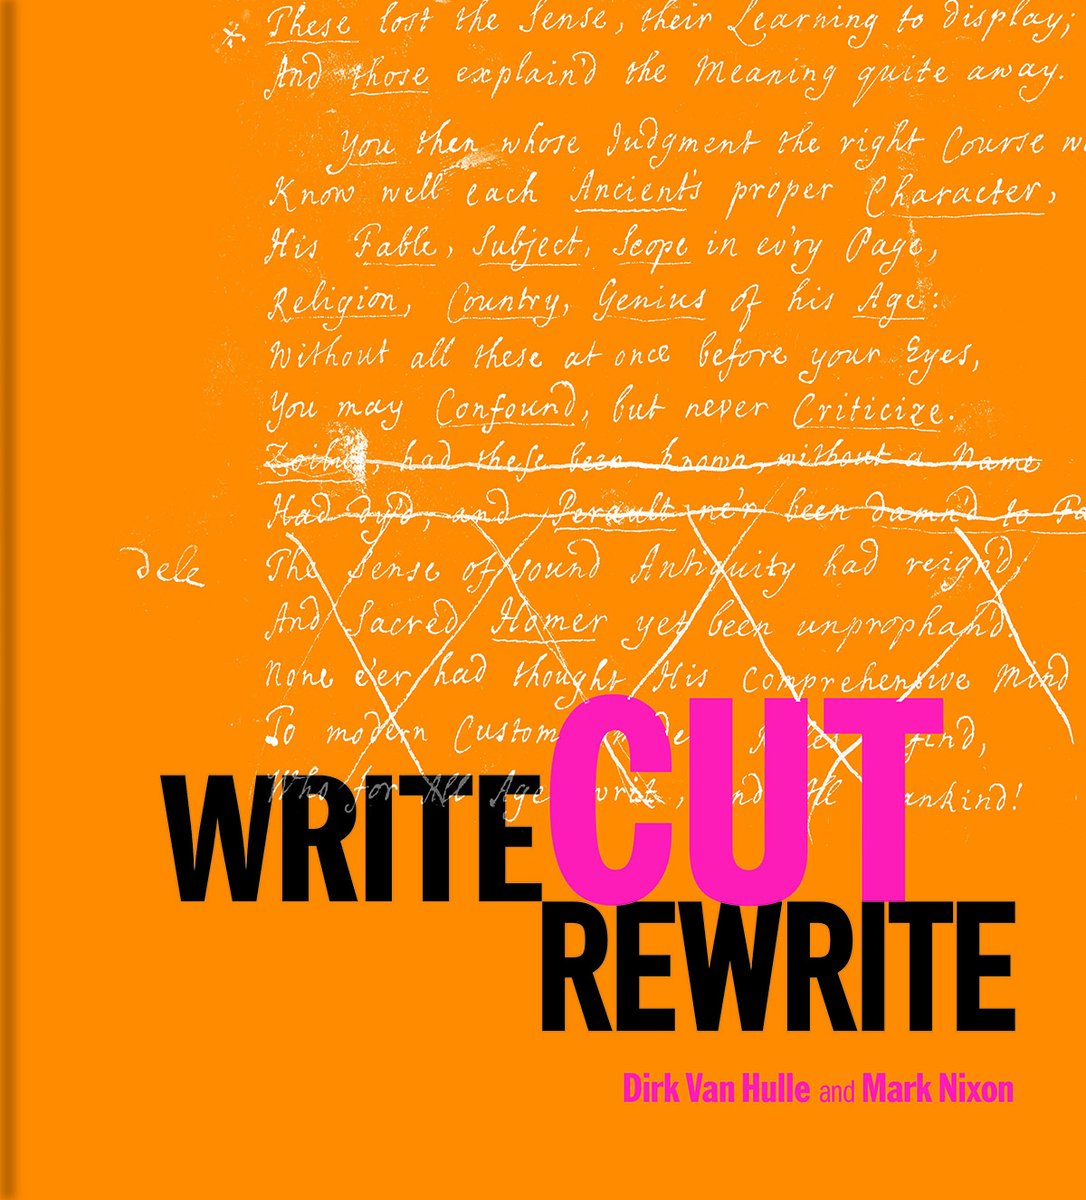 Did you know Jane Austen's Persuasion originally had a different ending? That Mary Shelley cut an entry from Percy Shelley's journal for Frankenstein? Or that Samuel Becket's Waiting for Godot was censored? Our new book explores the writes, cuts and rewrites in great literature